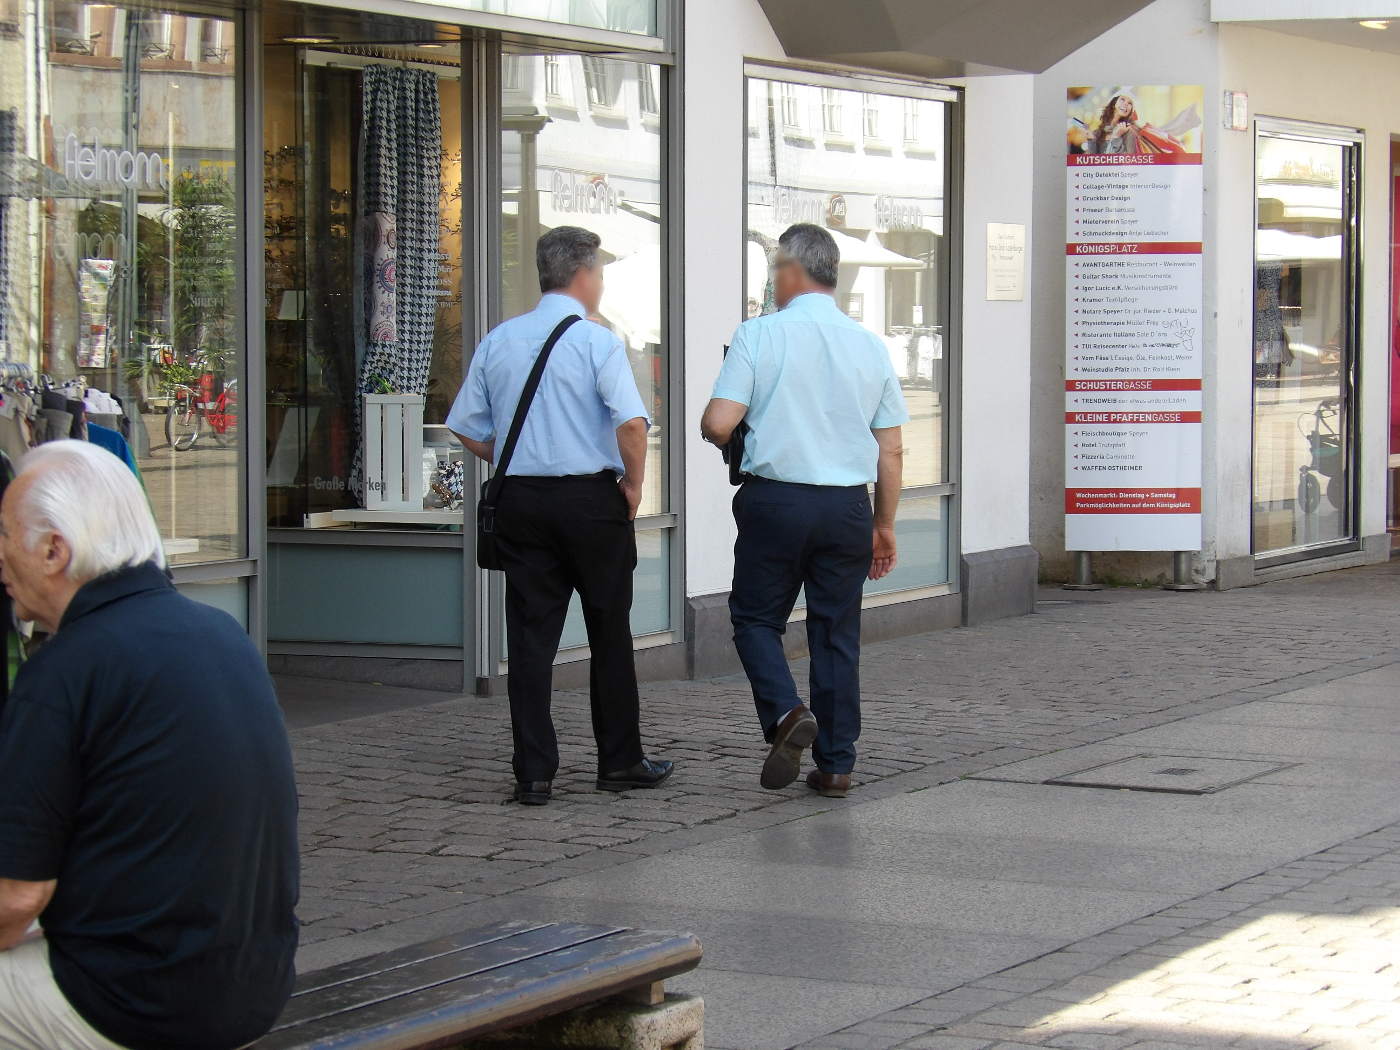 Jehovah's Witnesses go on patrol – some just sit around ...